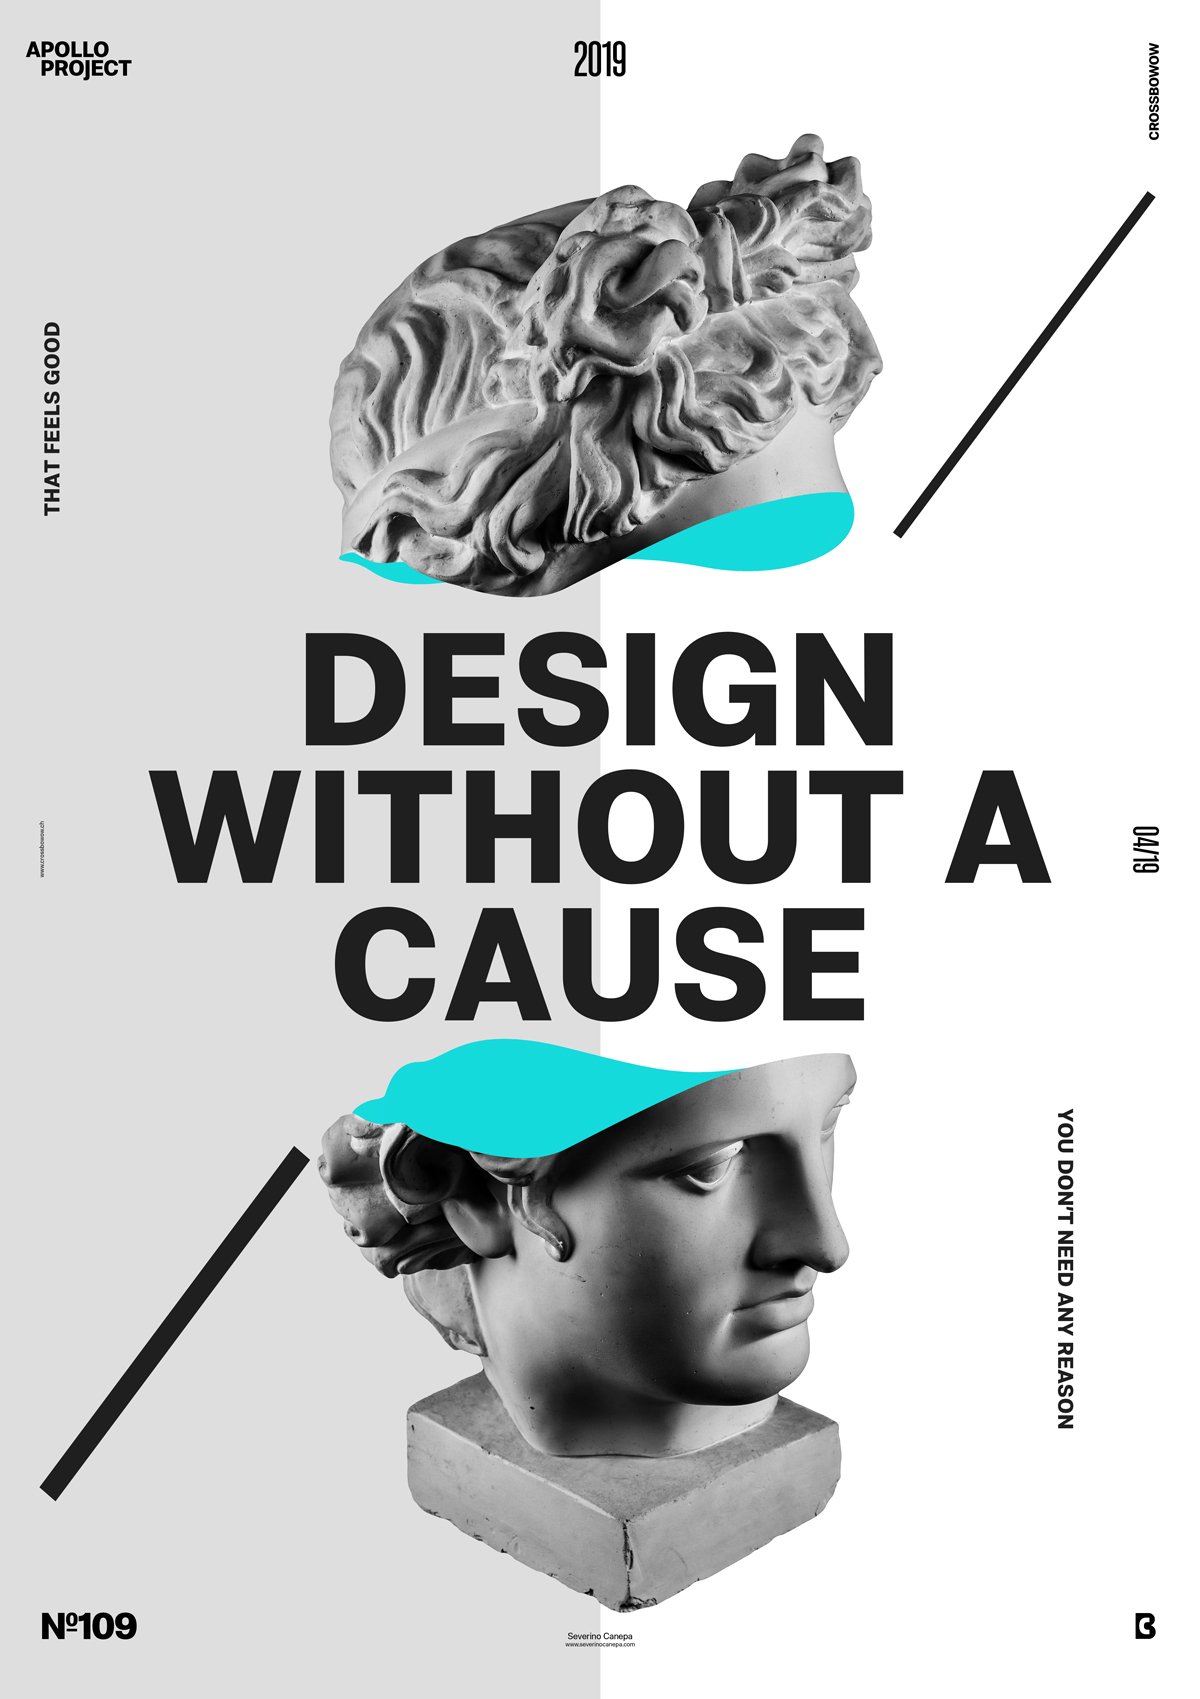 Visual of the simple yet creative and modern poster design #109 named Design Without a Cause